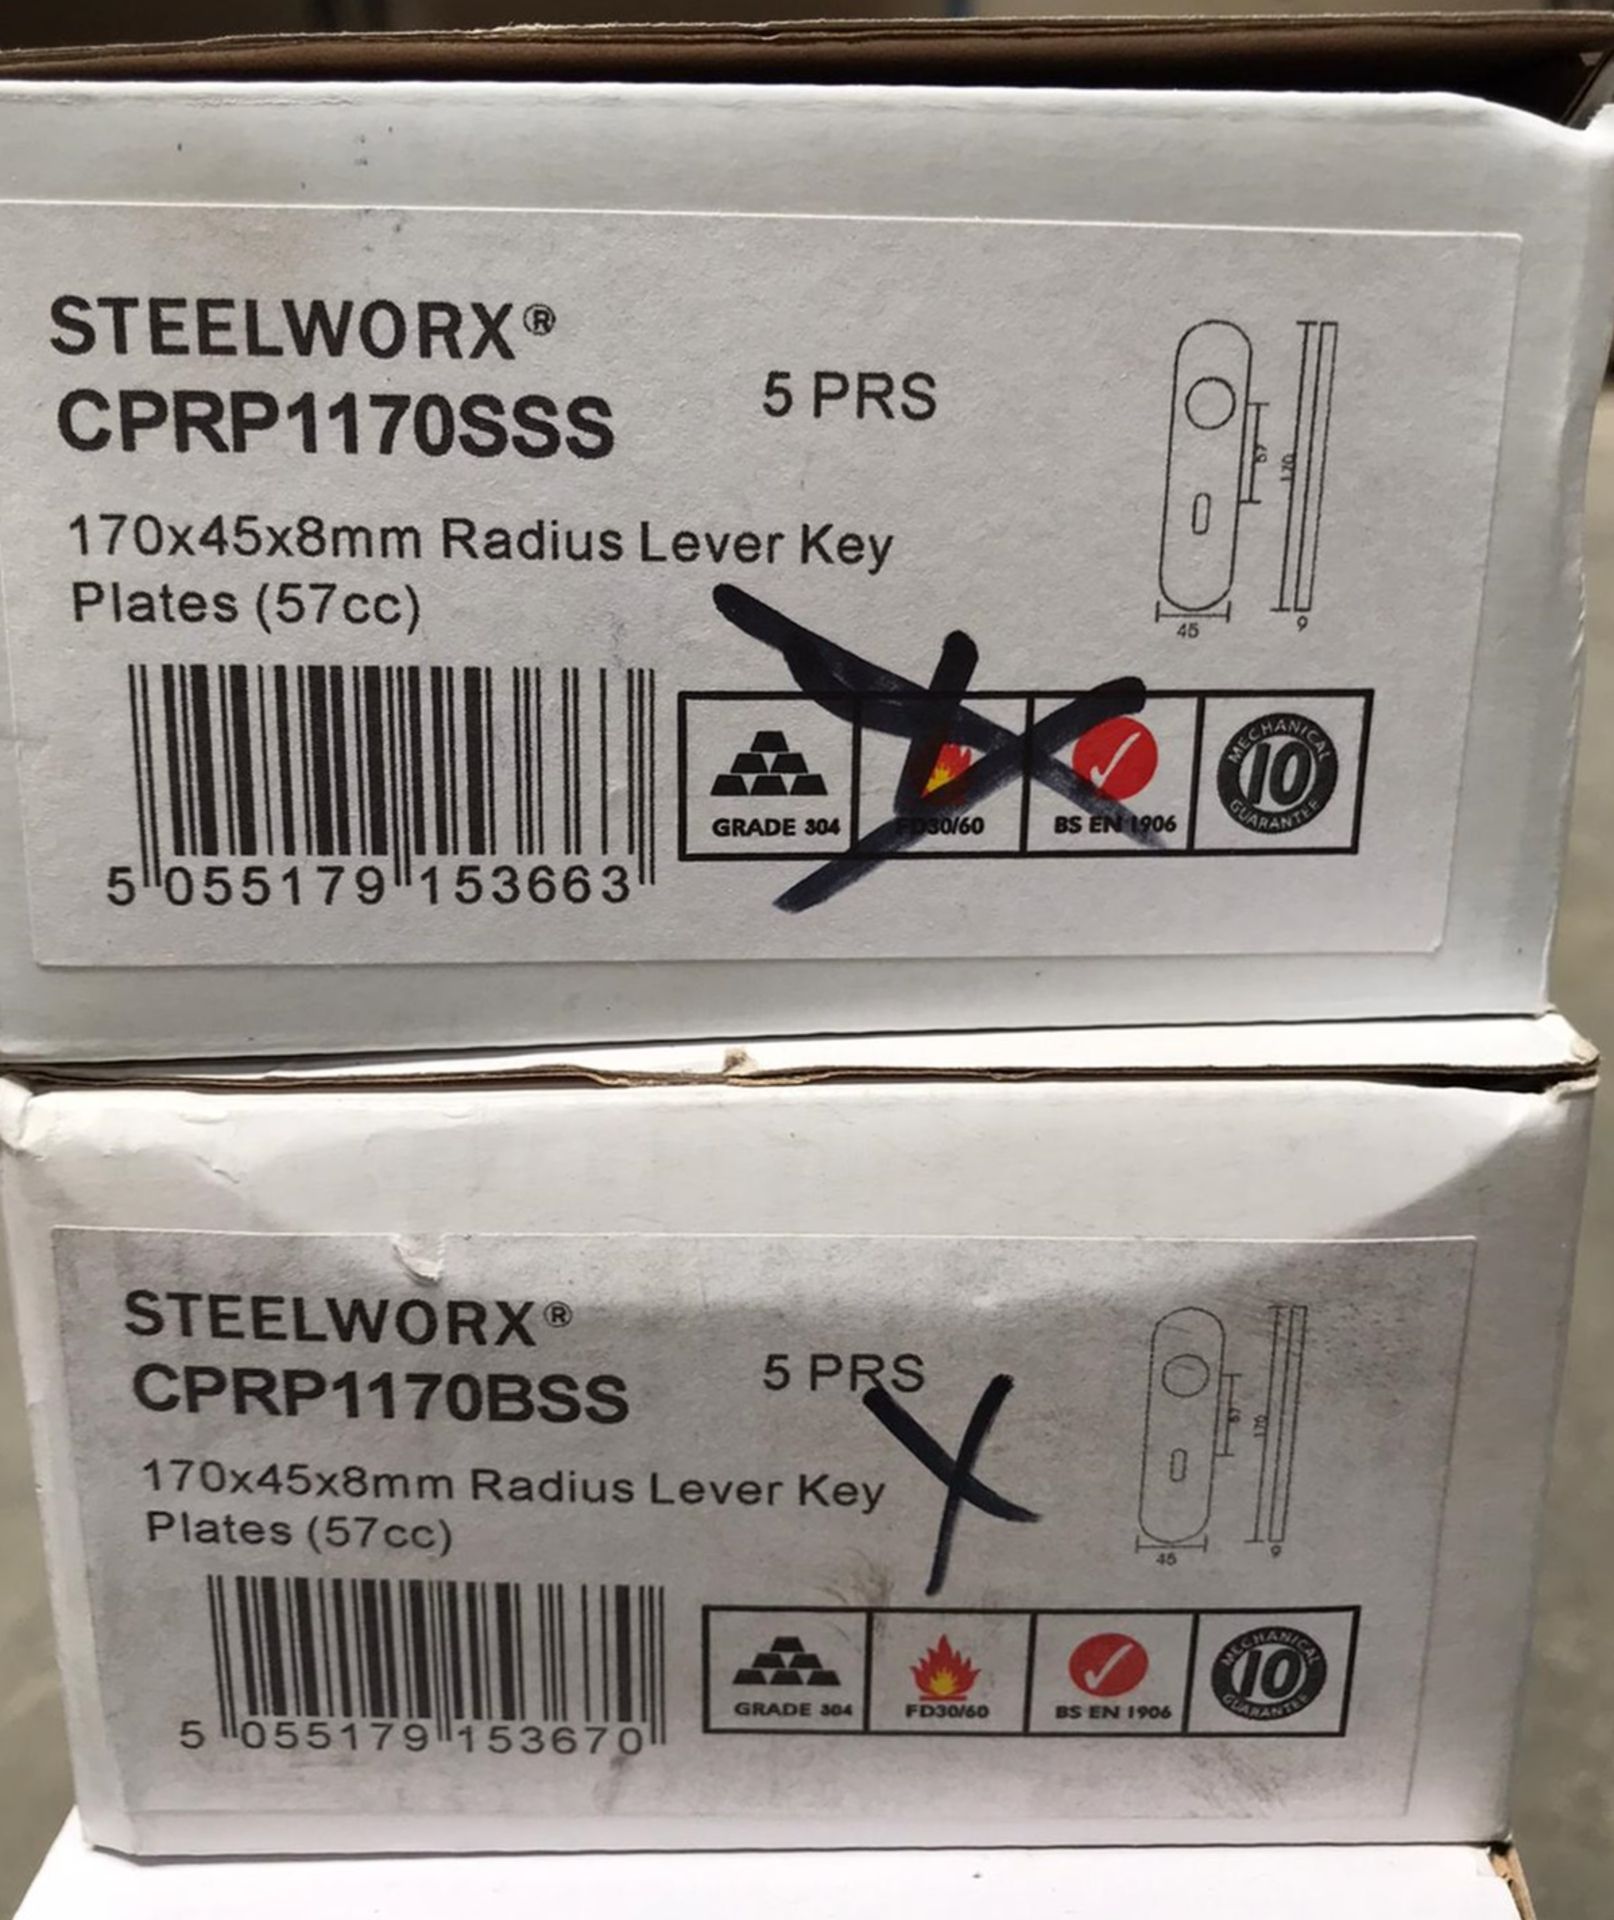 Approx 30 x Steelworx Radius Lever Key Plates - Brand New Stock - Product Code: CPRP1170SSS - - Image 4 of 4